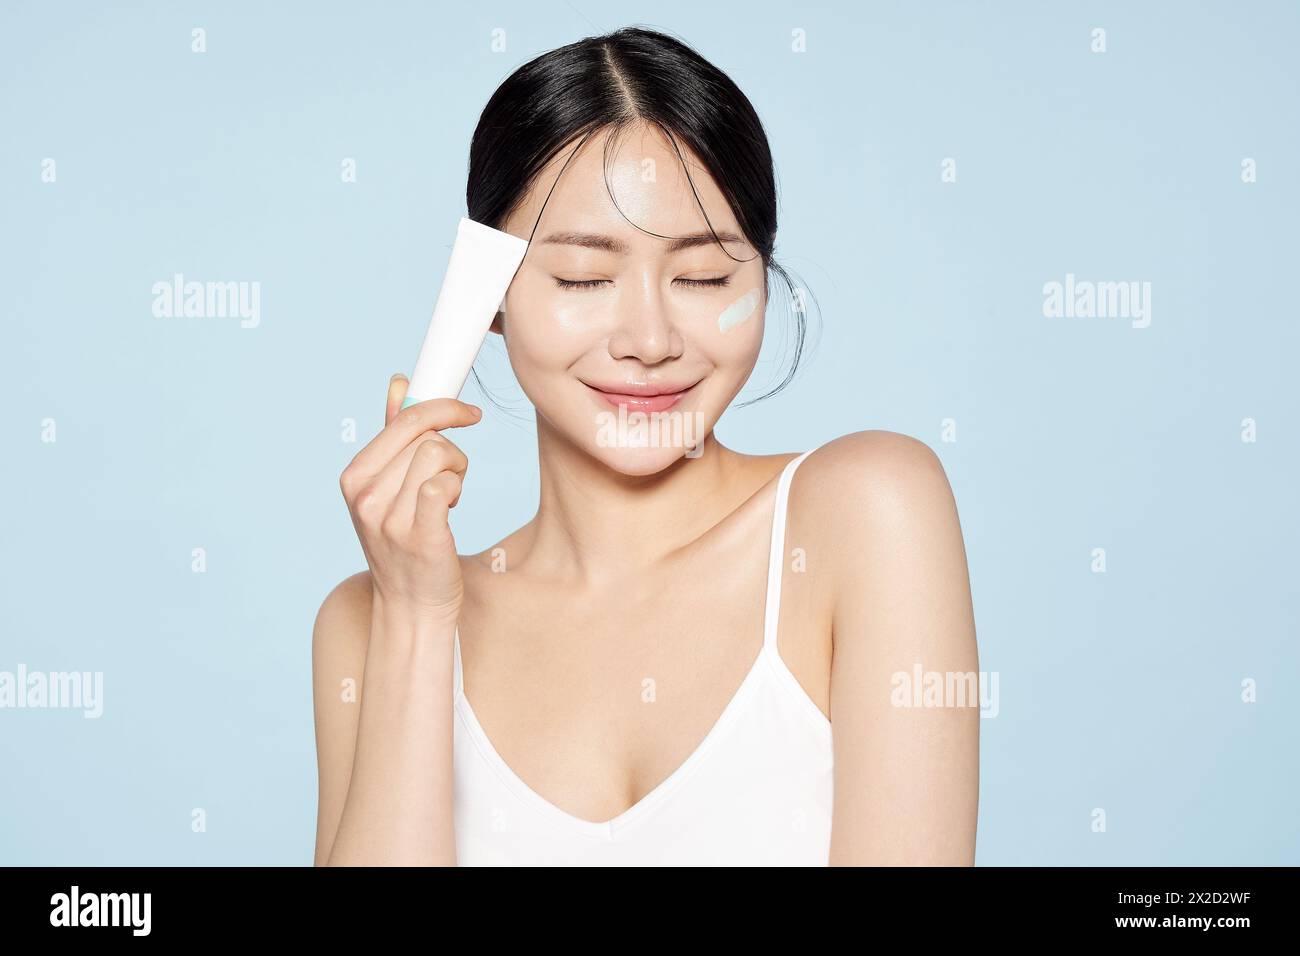 Asian Woman Poses With Cream Around Her Eyes Stock Photo